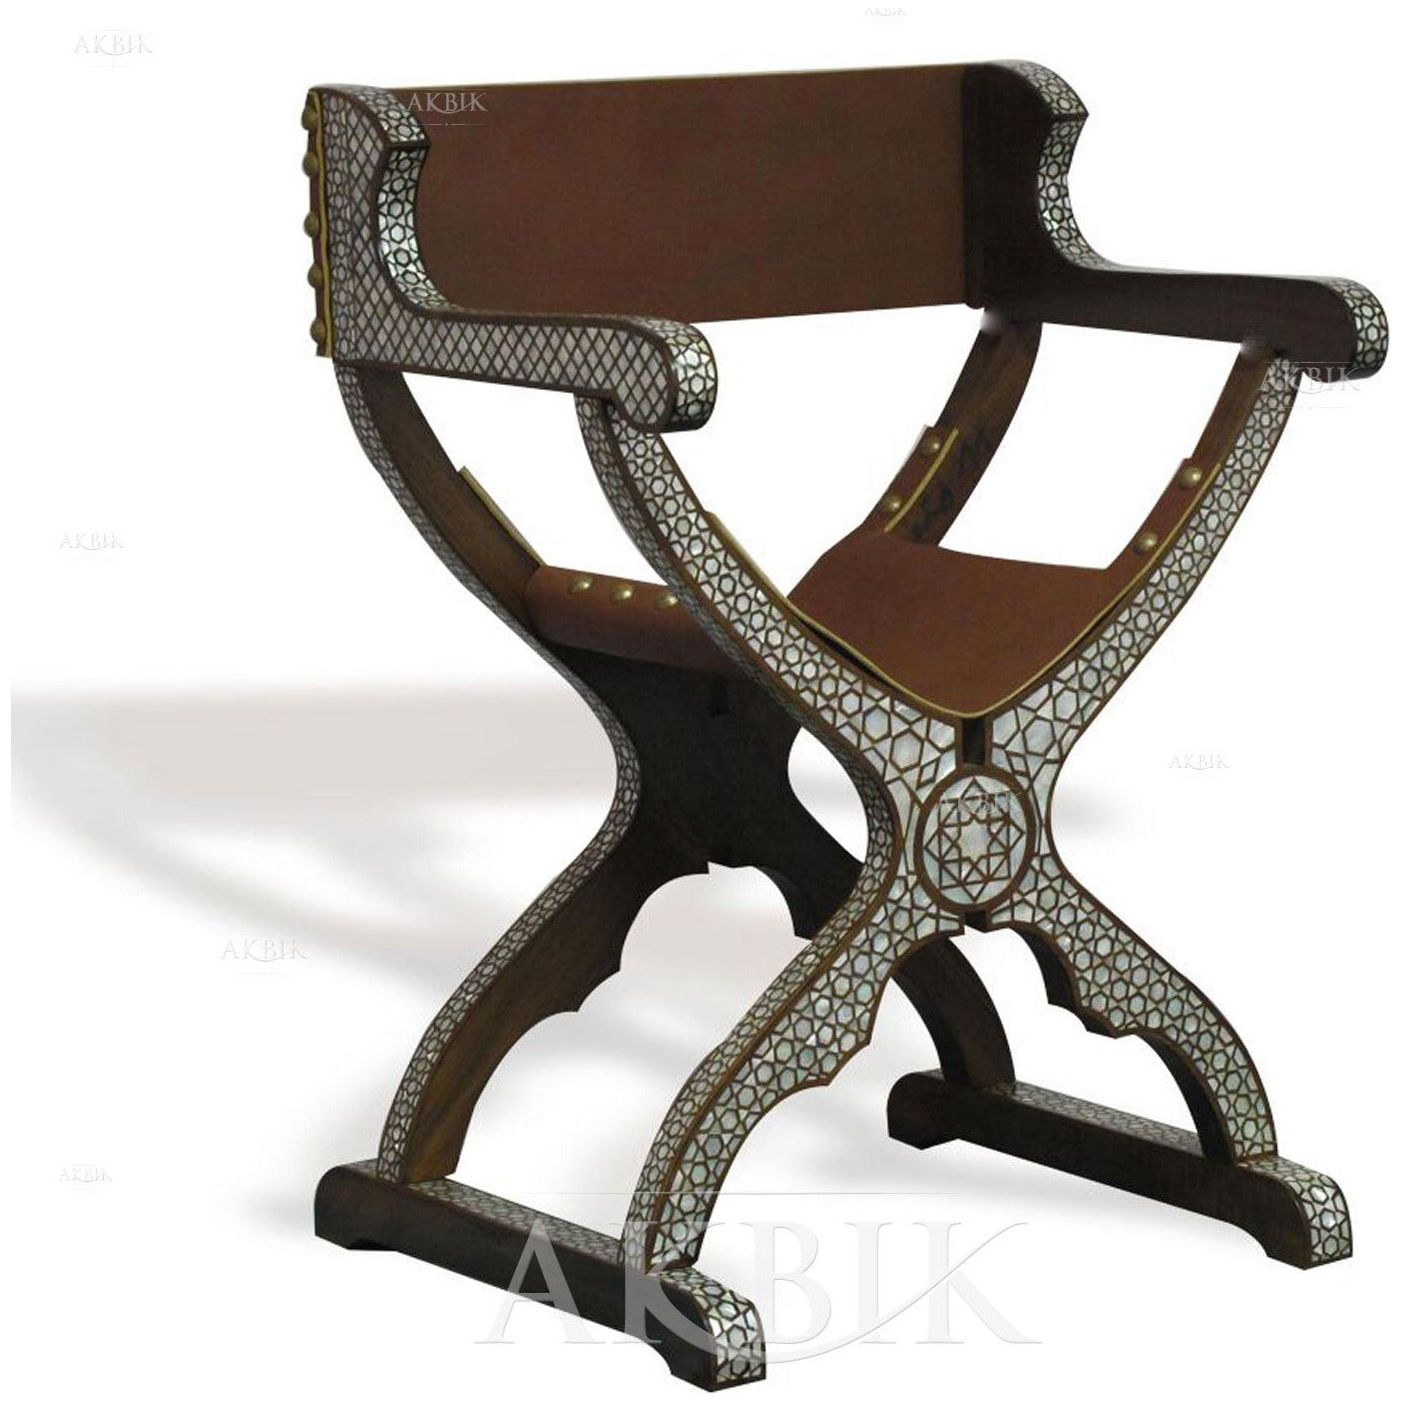 MEDITERRANEAN CHAIR INLAID WITH MOTHER OF PEARL - AKBIK Furniture & Design